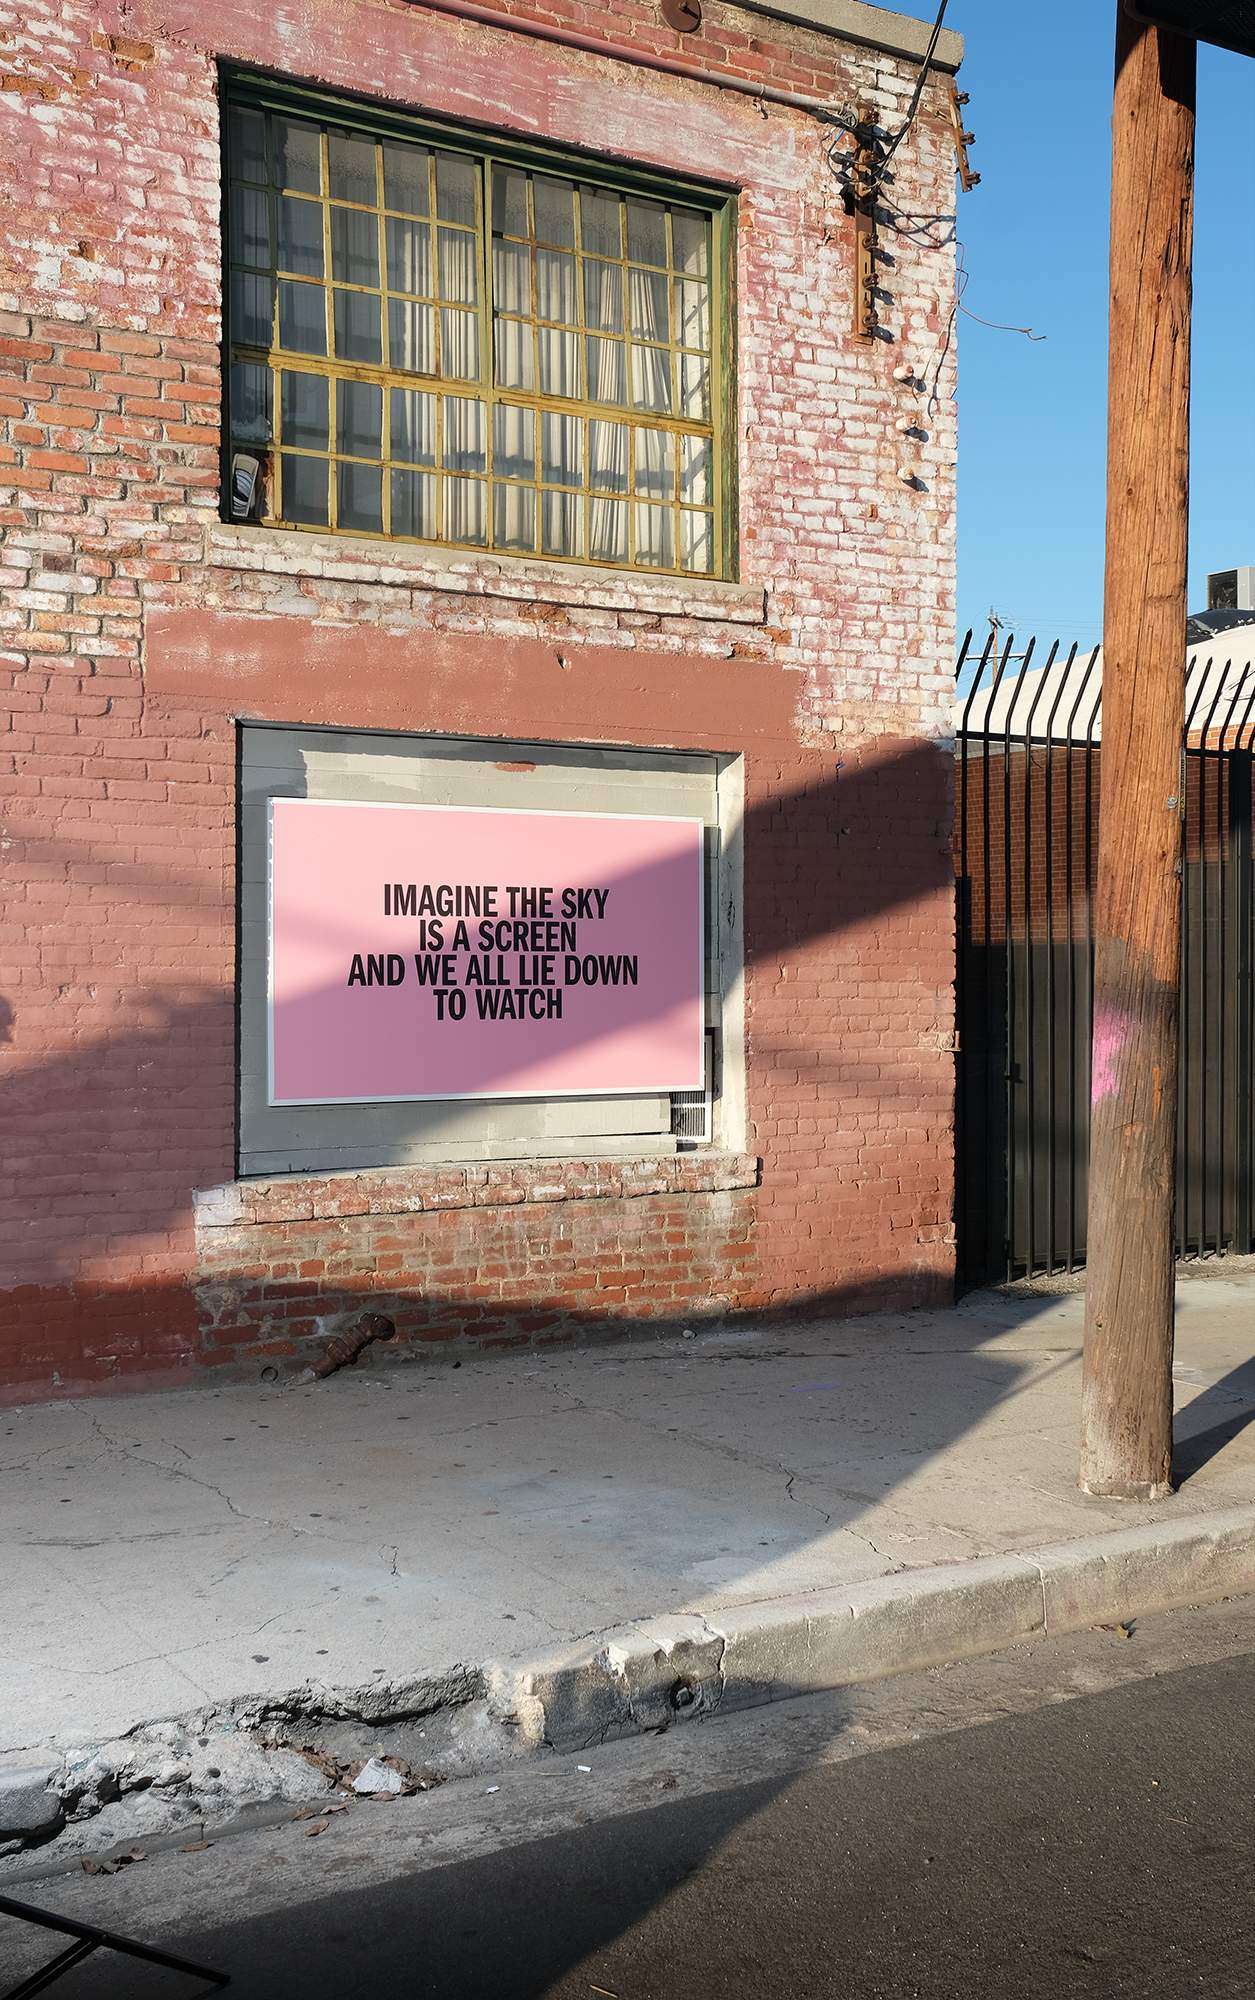 The Commons, public art intervention on mobile billboards, Los Angeles, 2022